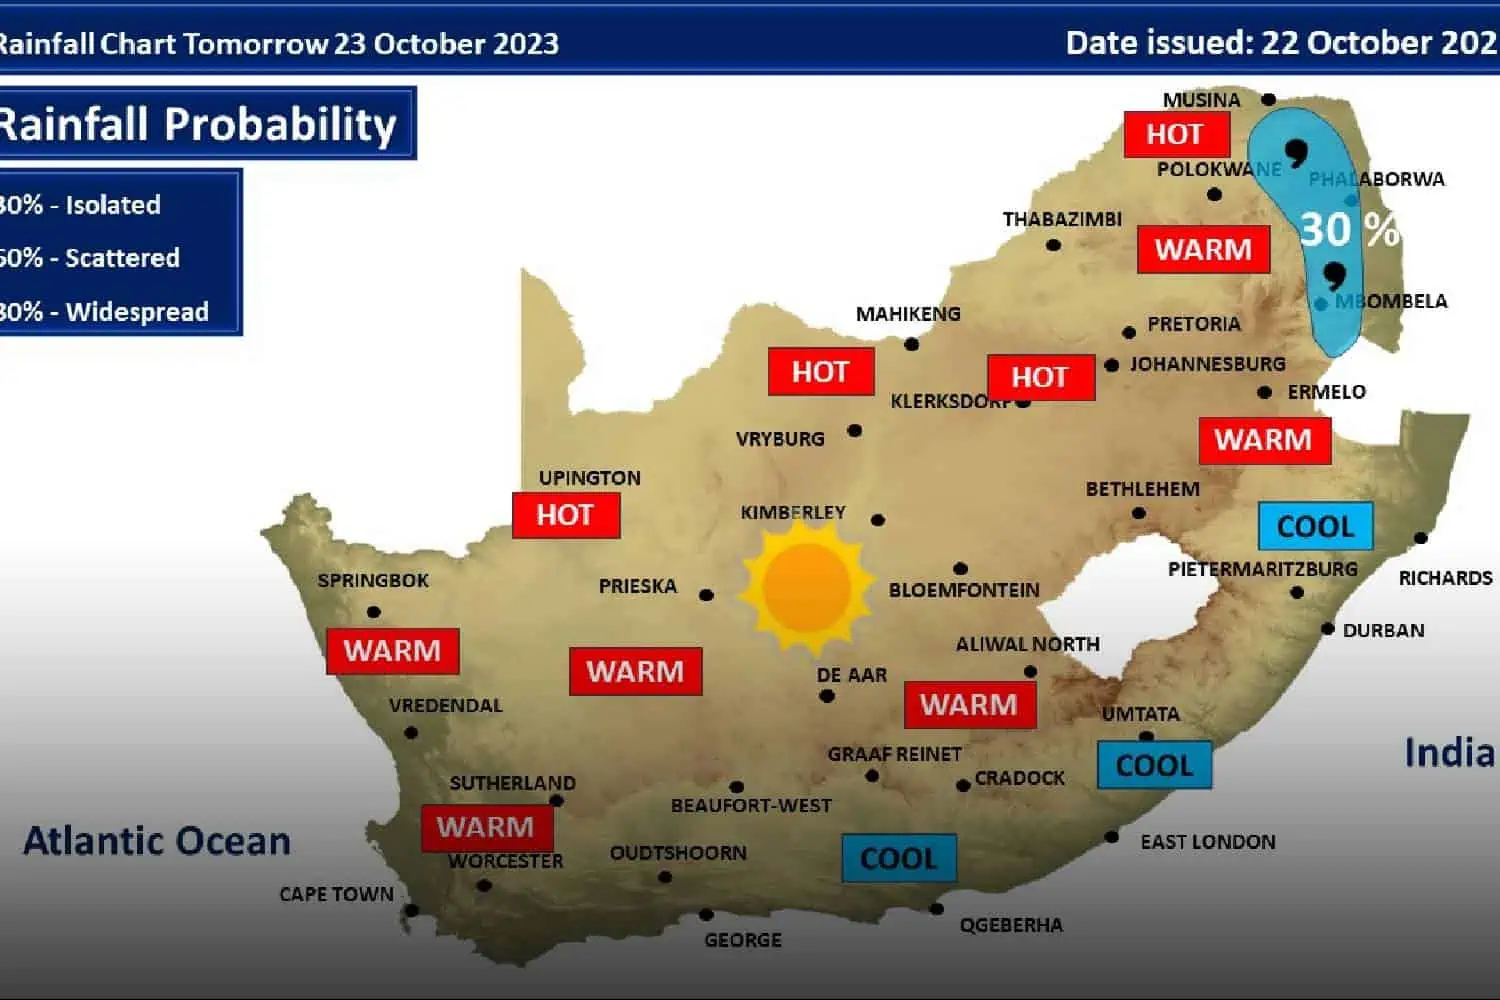 South Africa weather forecast Monday 23 October 2023